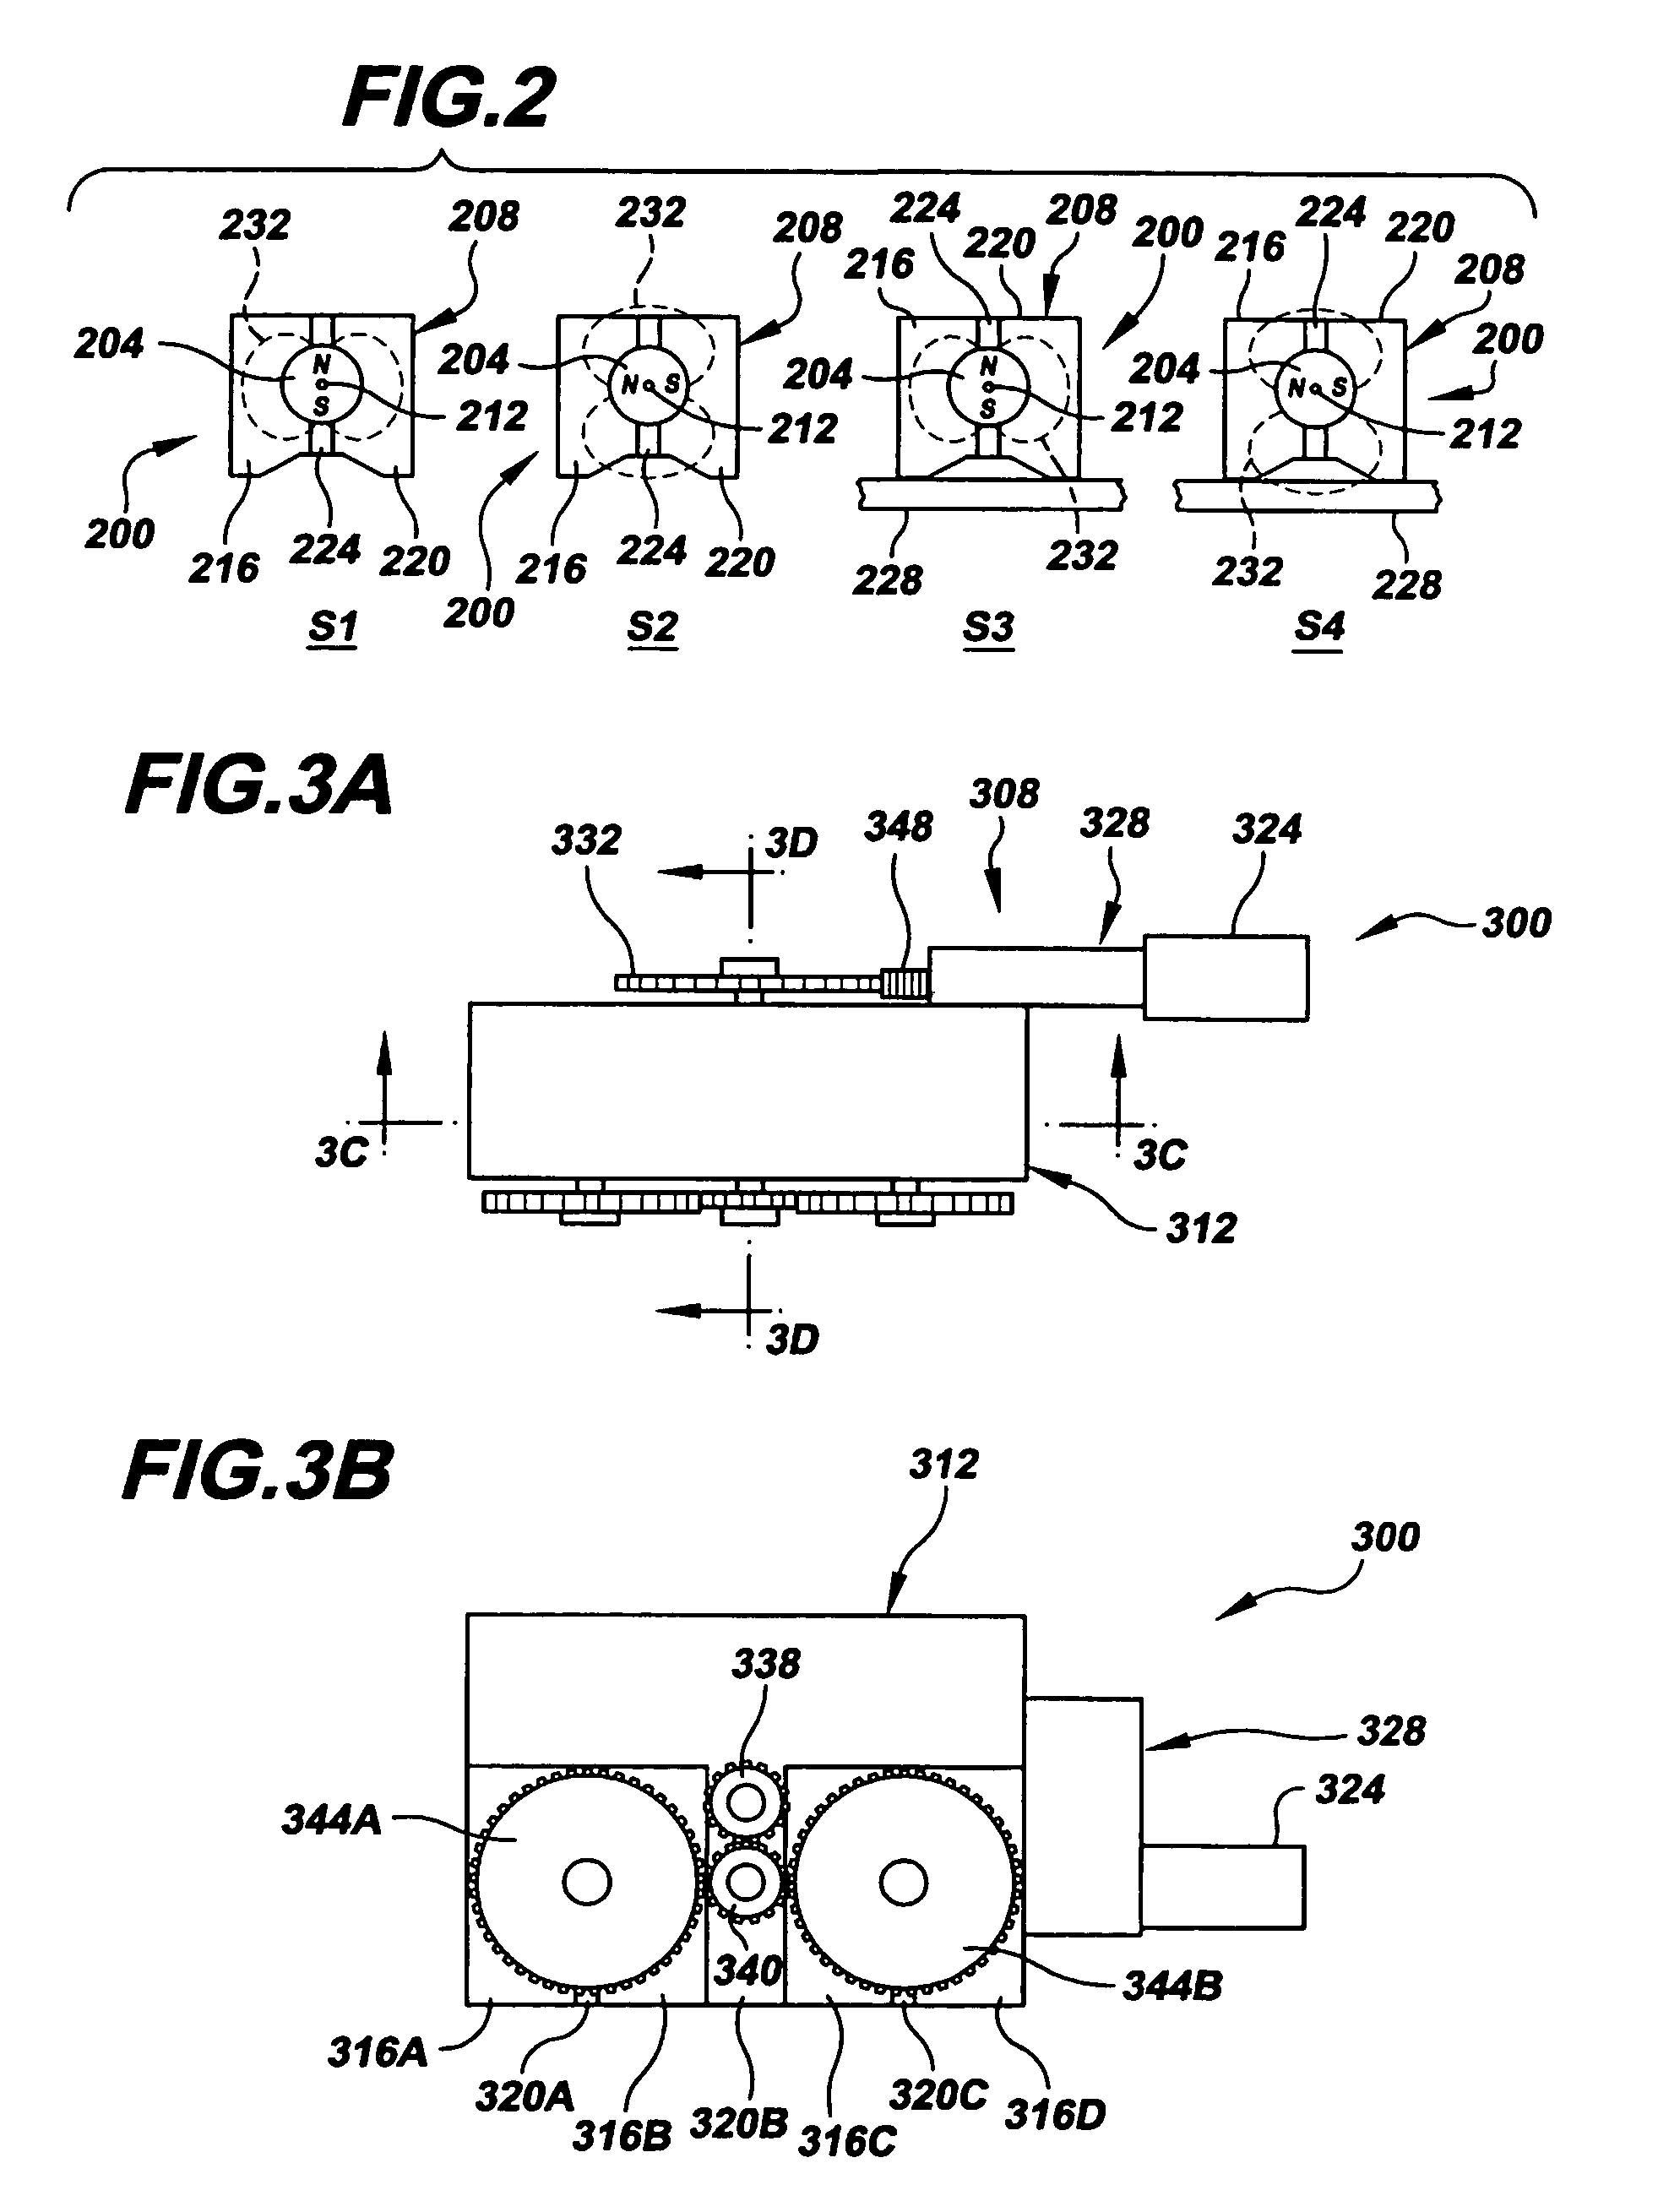 Systems comprising a mechanically actuated magnetic on-off attachment device